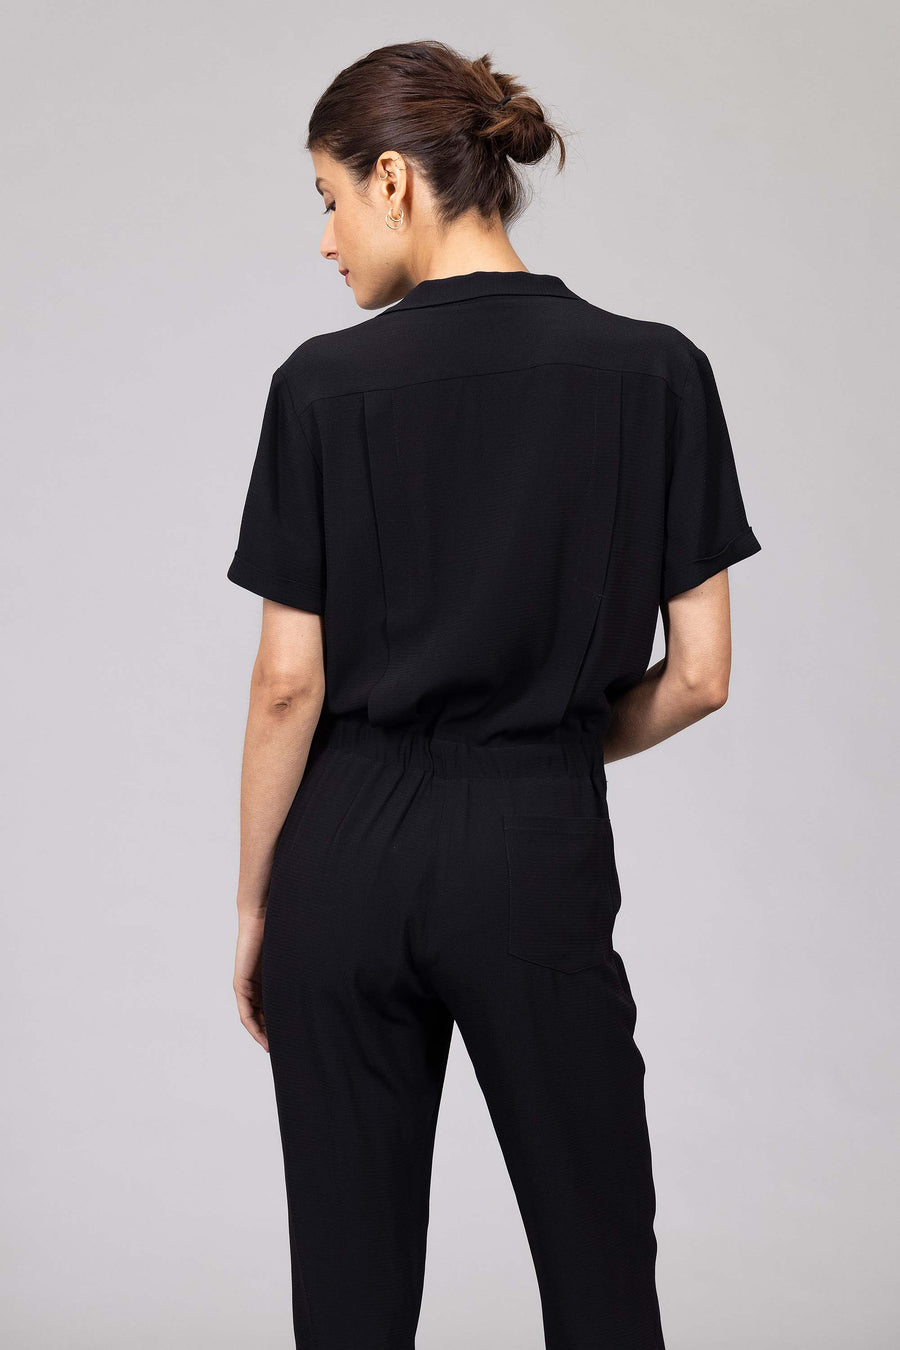 THERESE Jumpsuit Black 